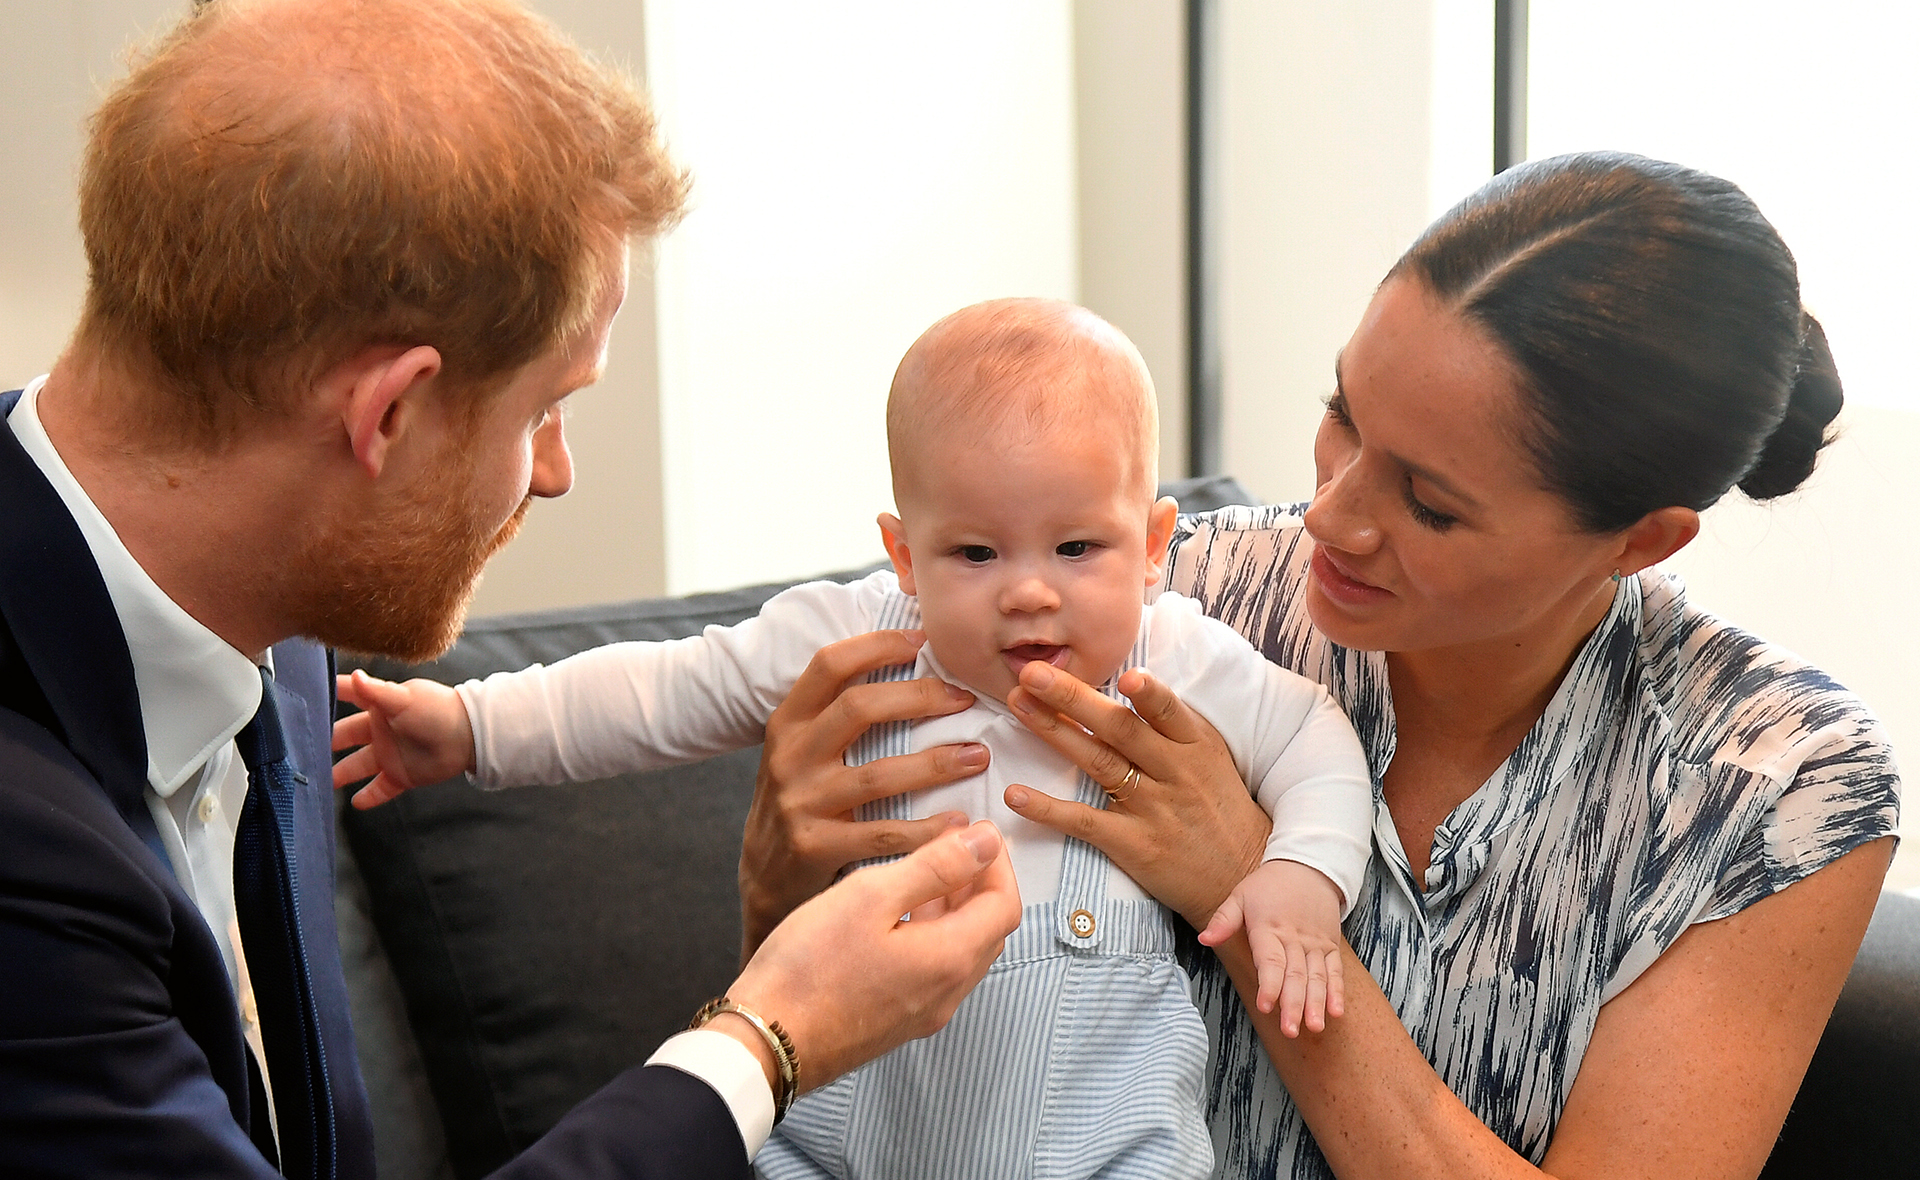 Which royal really made the ‘racist’ comment about the colour of Archie’s skin? We’re investigating Prince Harry and Meghan Markle’s claim